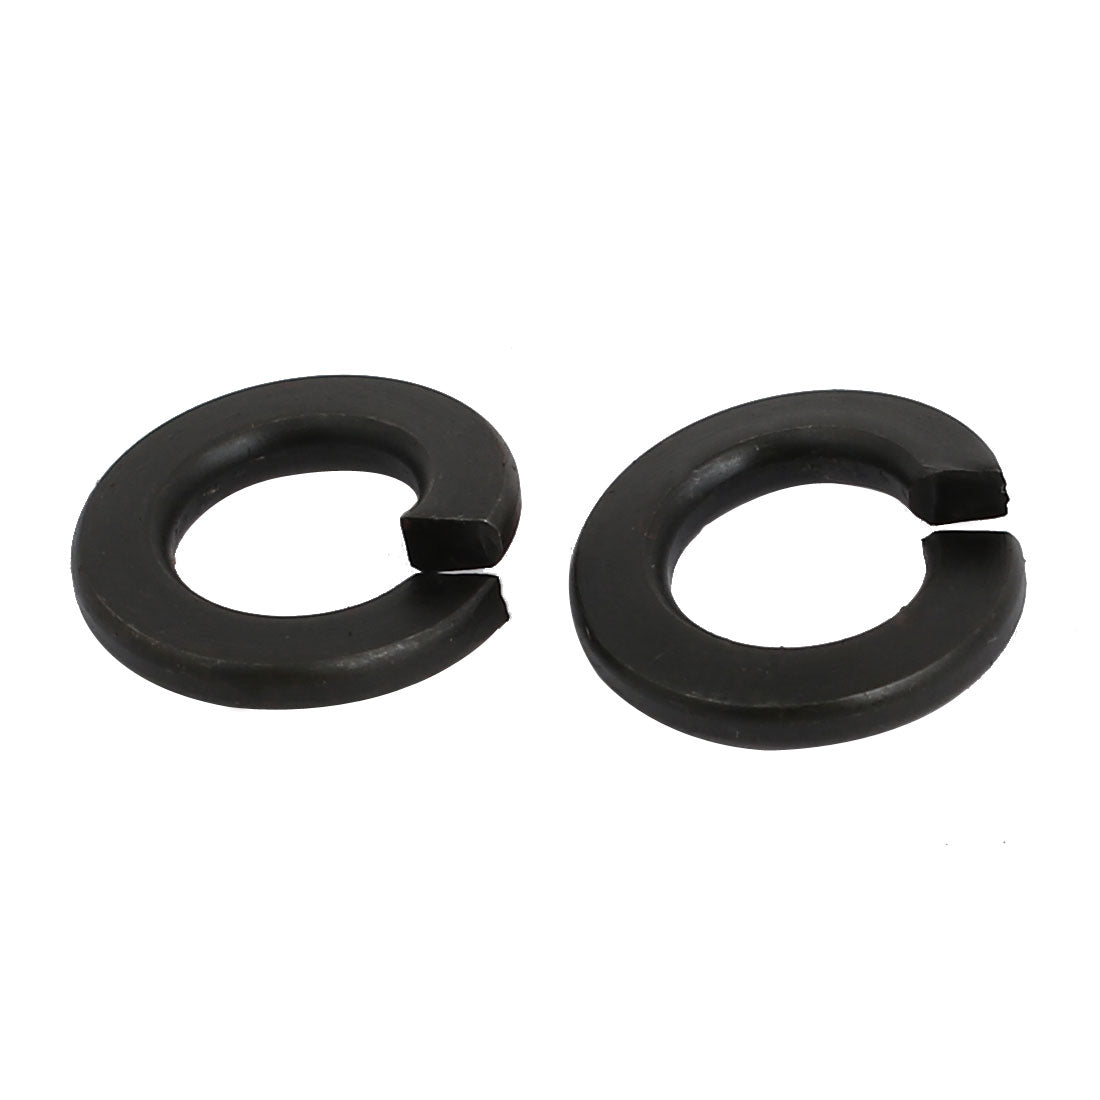 uxcell Uxcell 50pcs 5/16-inch Inner Dia Carbon Steel Split Lock Spring Washer Gasket Black